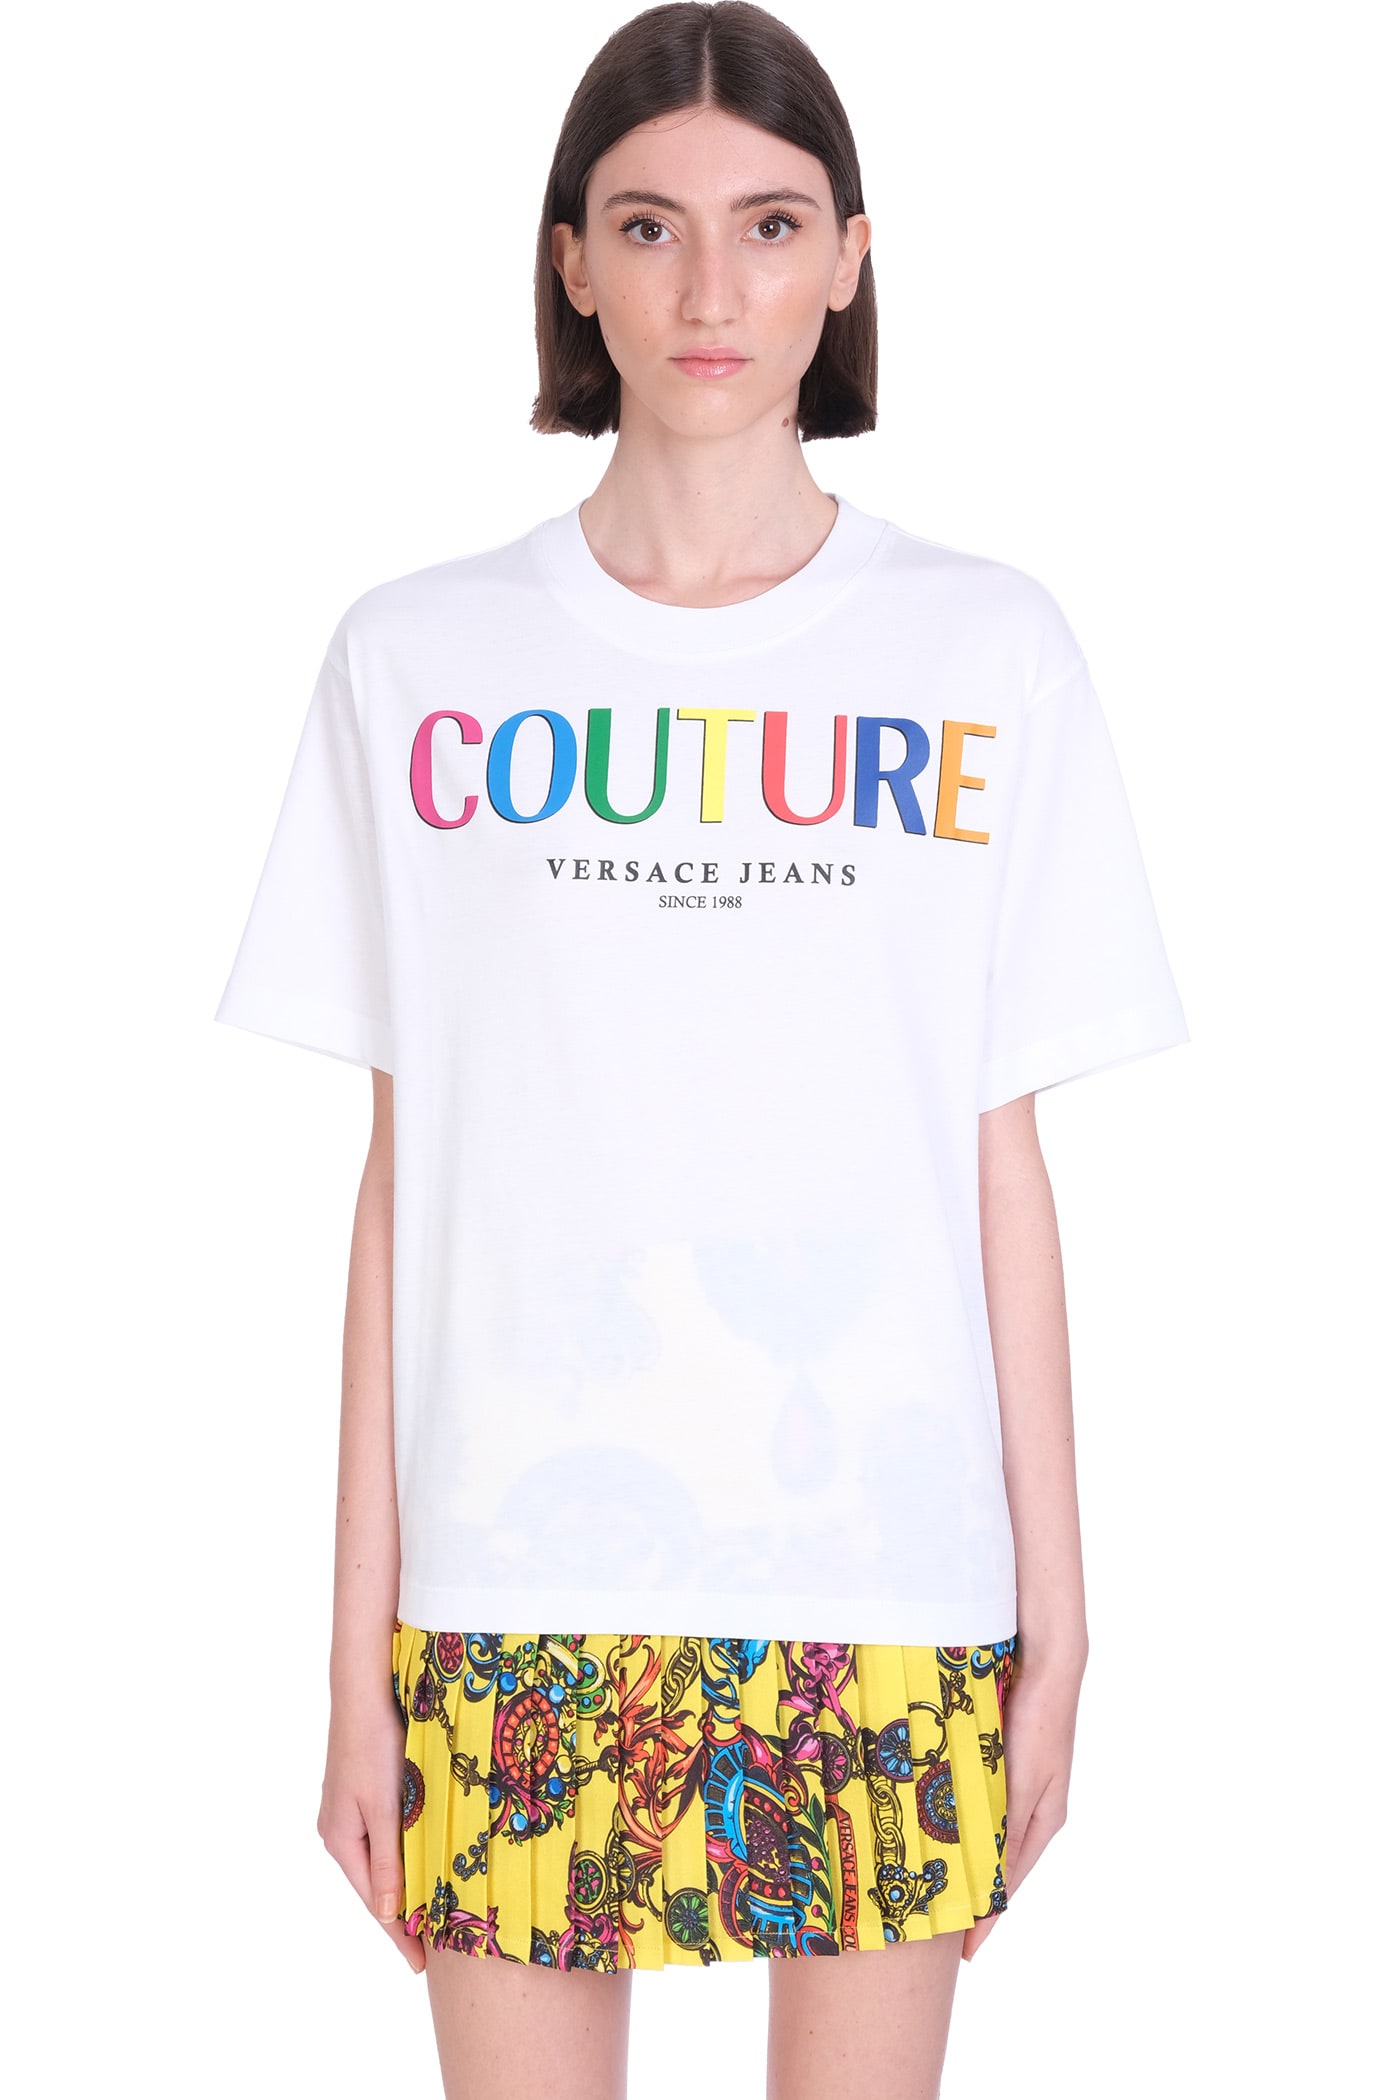 VERSACE JEANS COUTURE T-SHIRT IN WHITE COTTON,71HAHP02CJ00P003